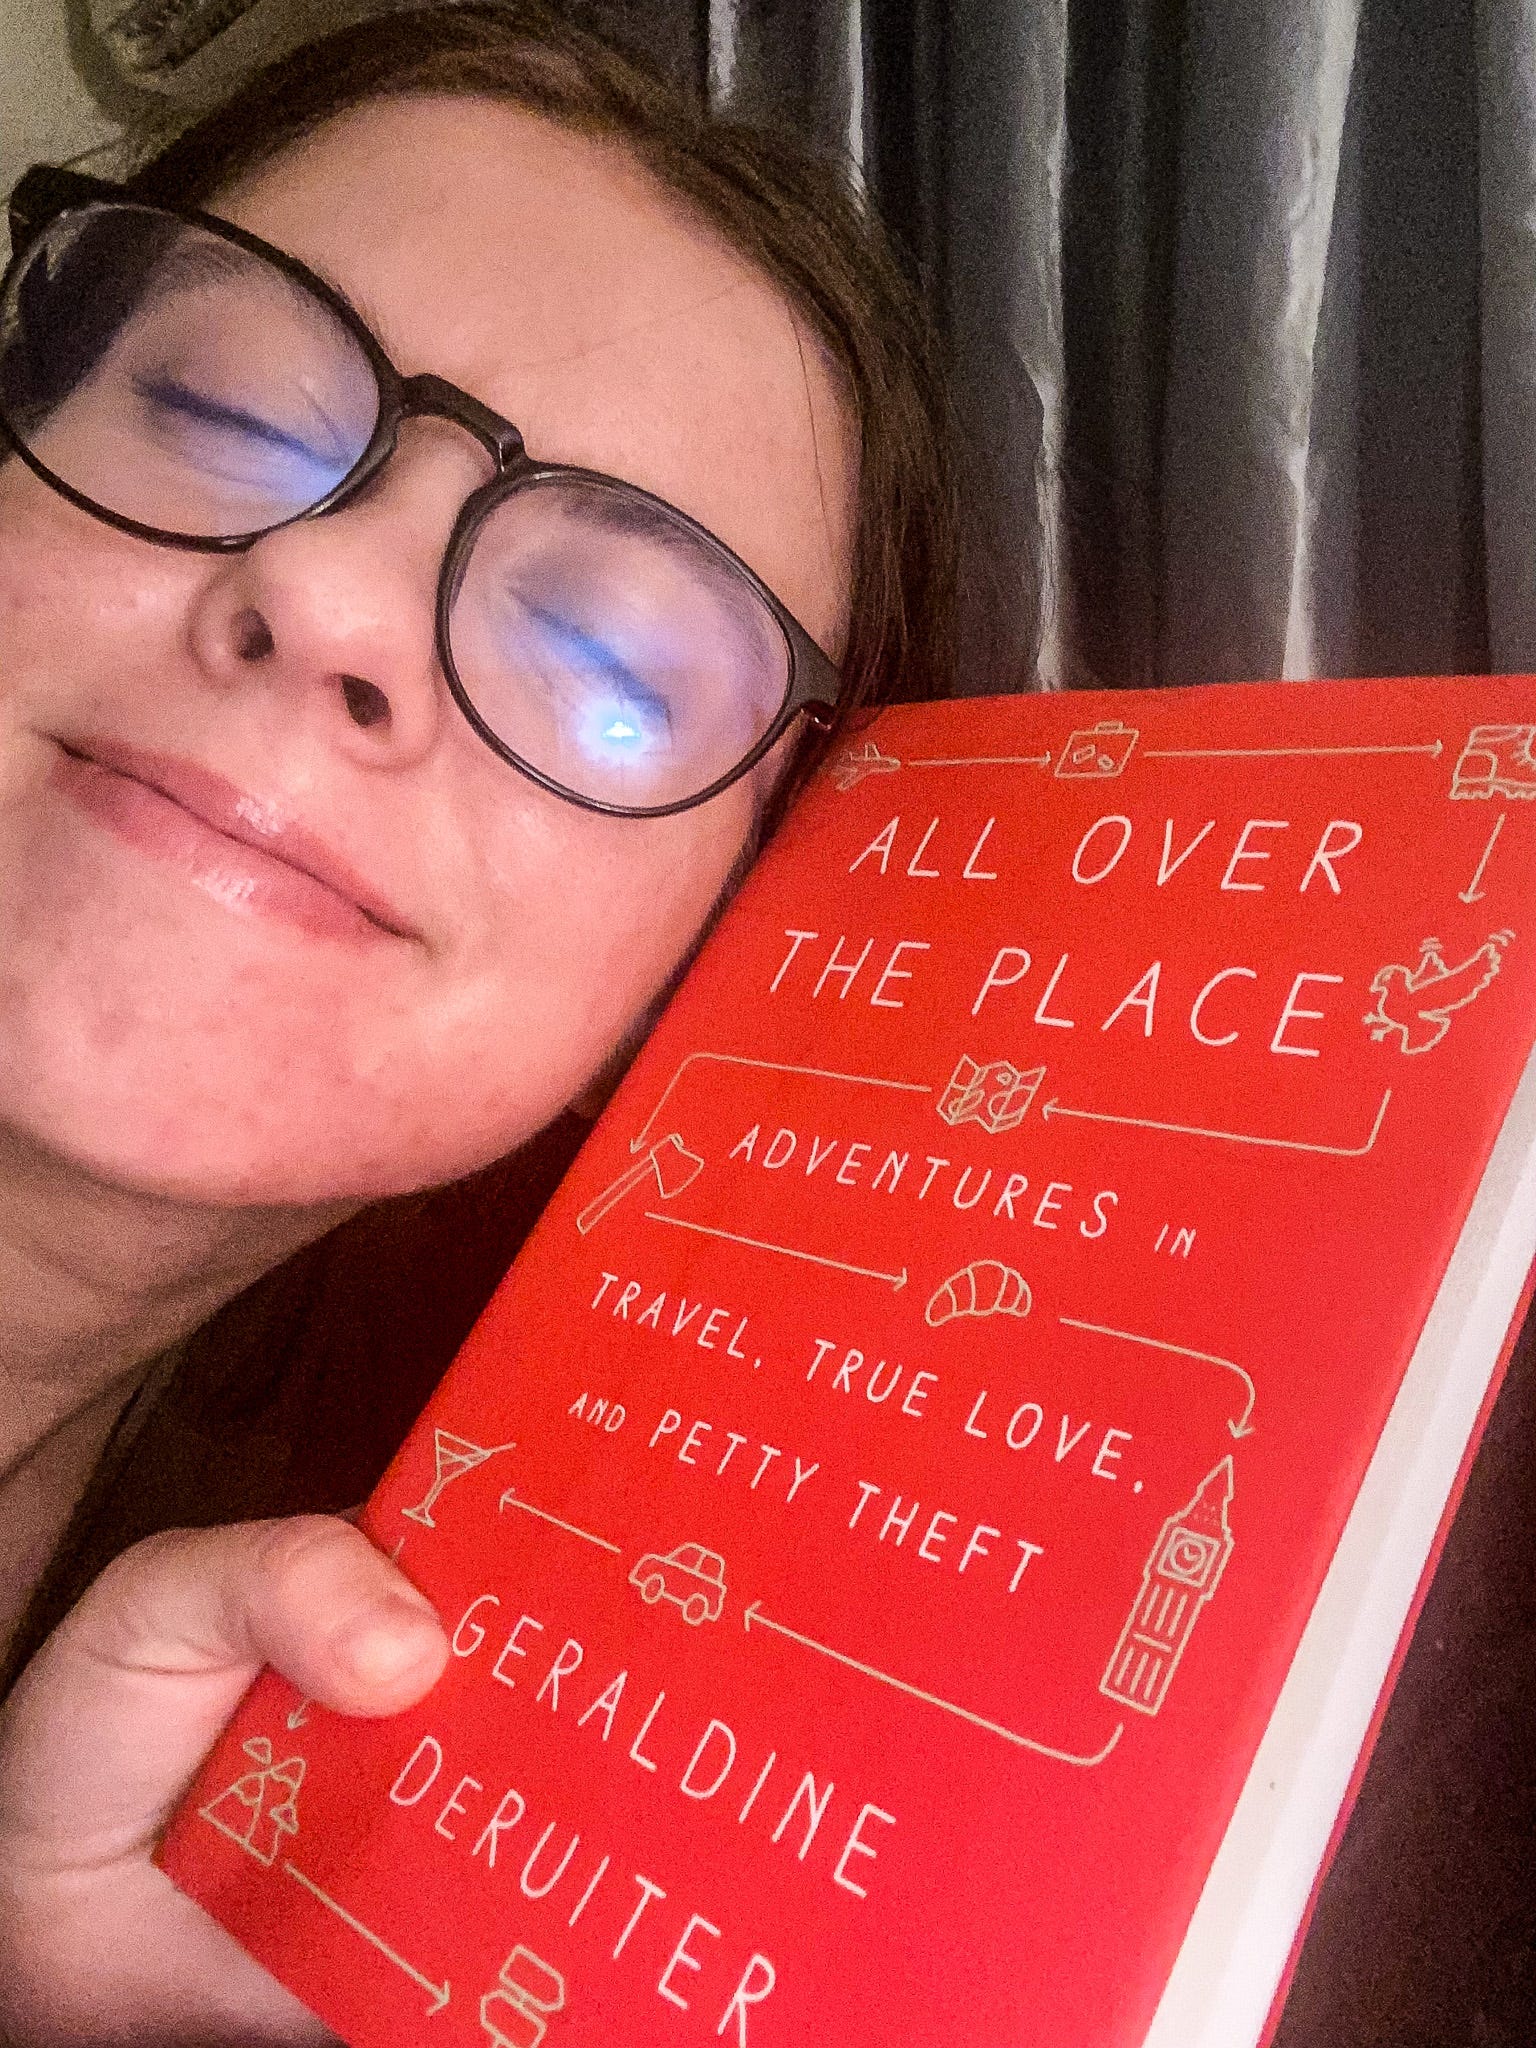 A photo of me smiling like a dork in my blue light glasses while hugging "All Over the Place" - a red book by Geraldine DeRuiter